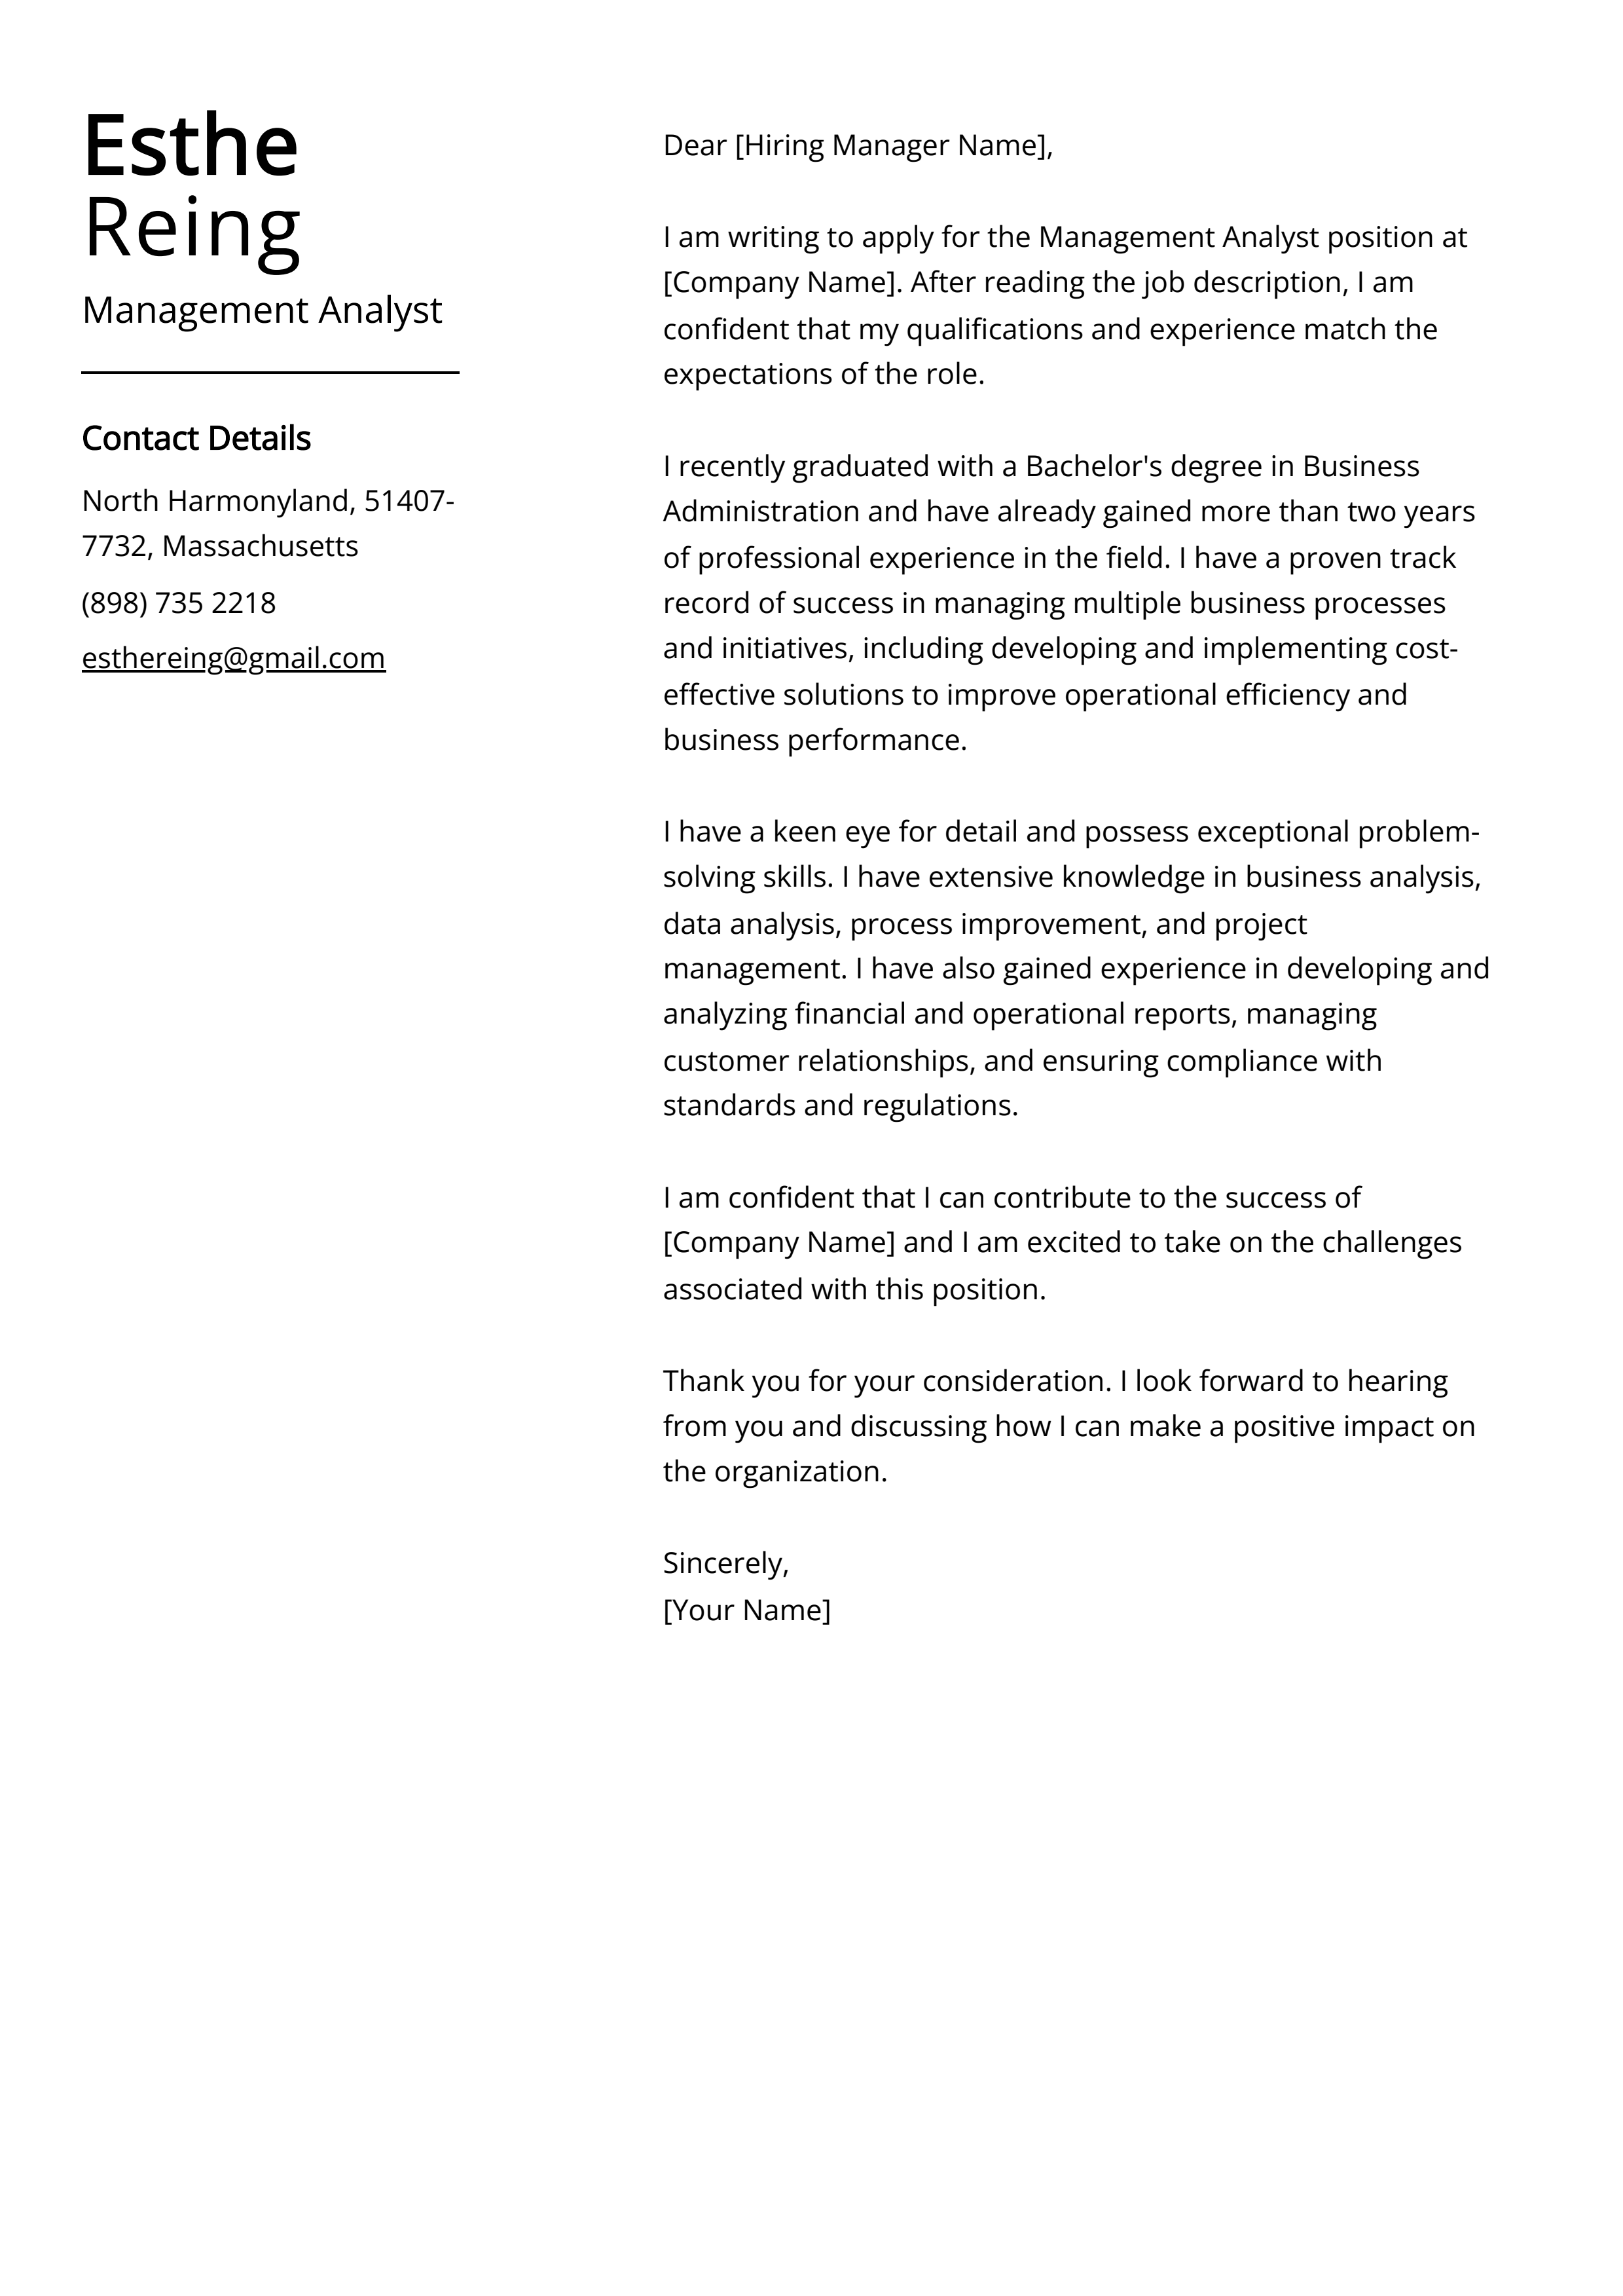 Management Analyst Cover Letter Example